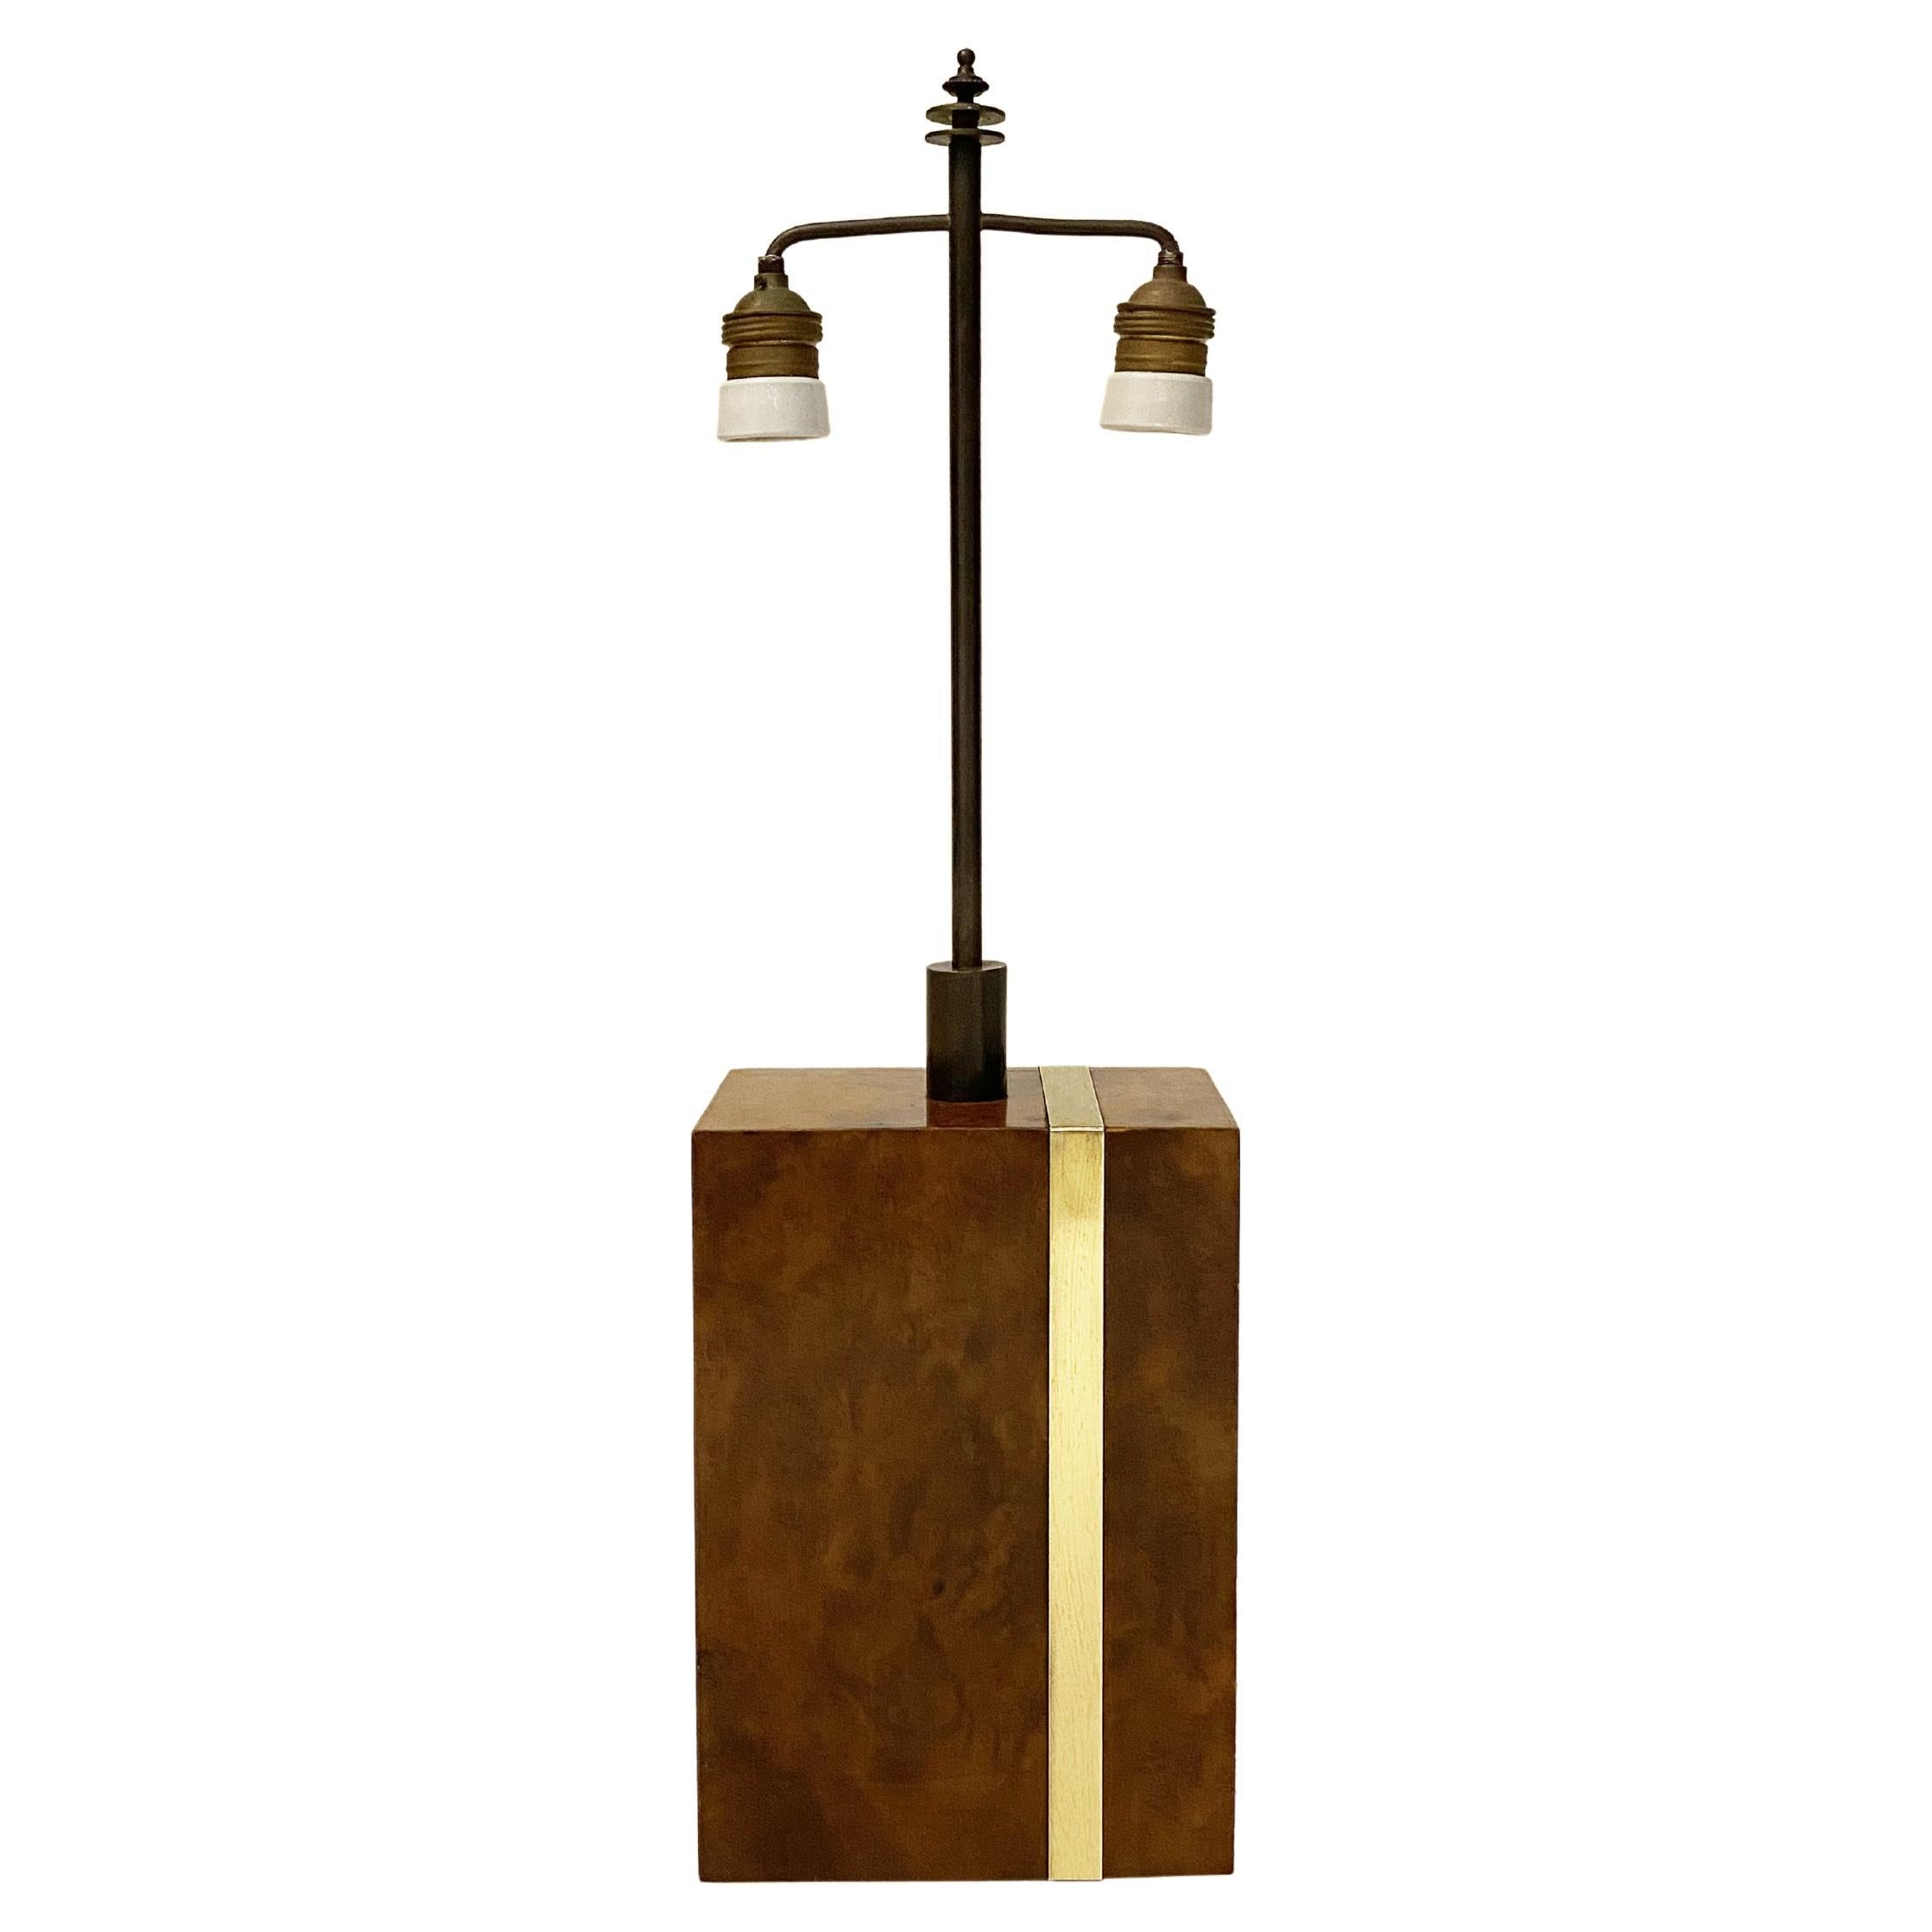 Modernist Lamp in Thuya Burl Wood and Brass, in the Style of Willy Rizzo, 1970s For Sale